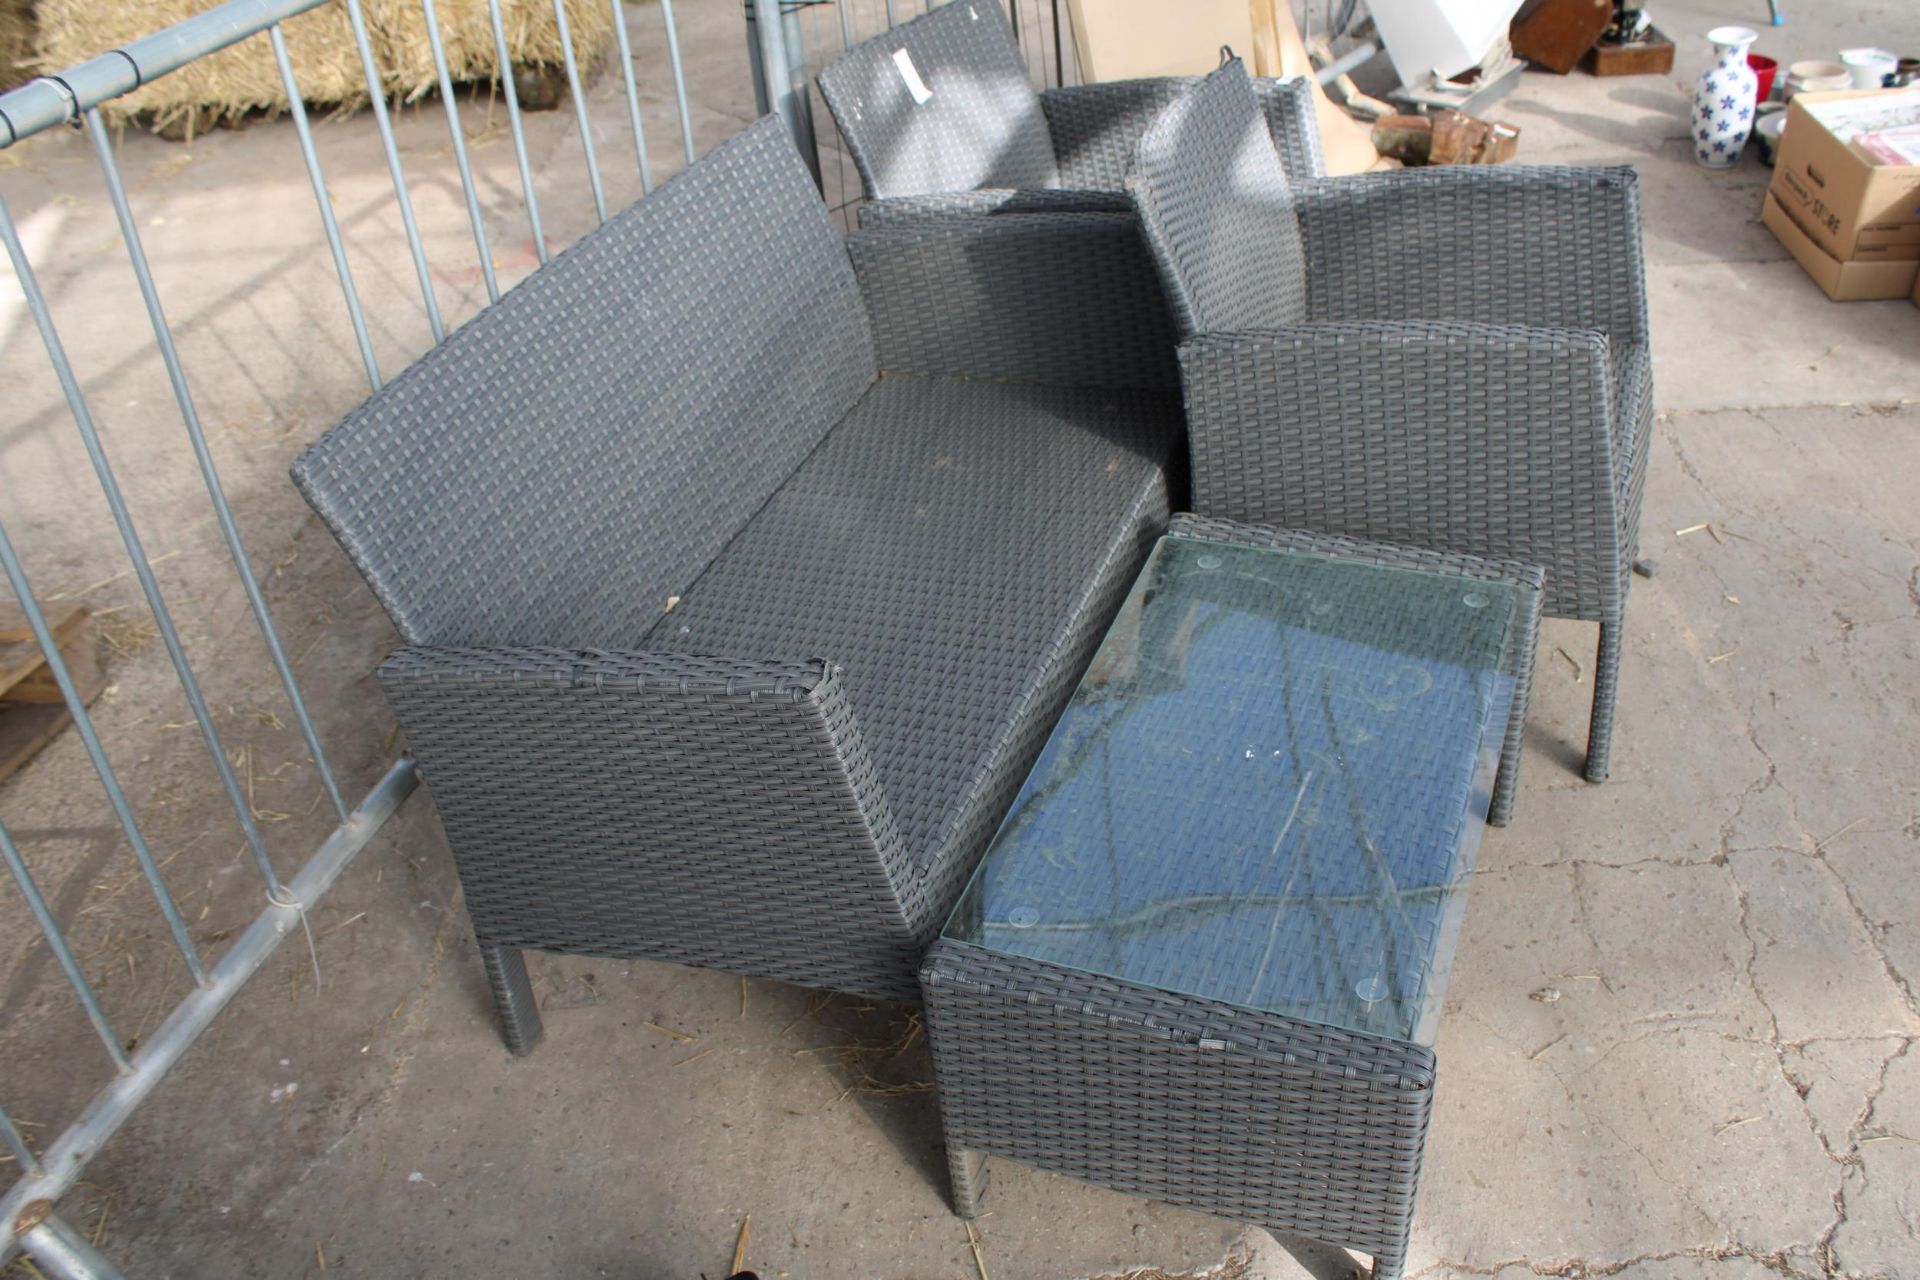 A RATTAN GARDEN FURNITURE SET COMPRISING OF A TWO SEATER BENCH, TWO CHAIRS AND A COFFEE TABLE - Bild 3 aus 3